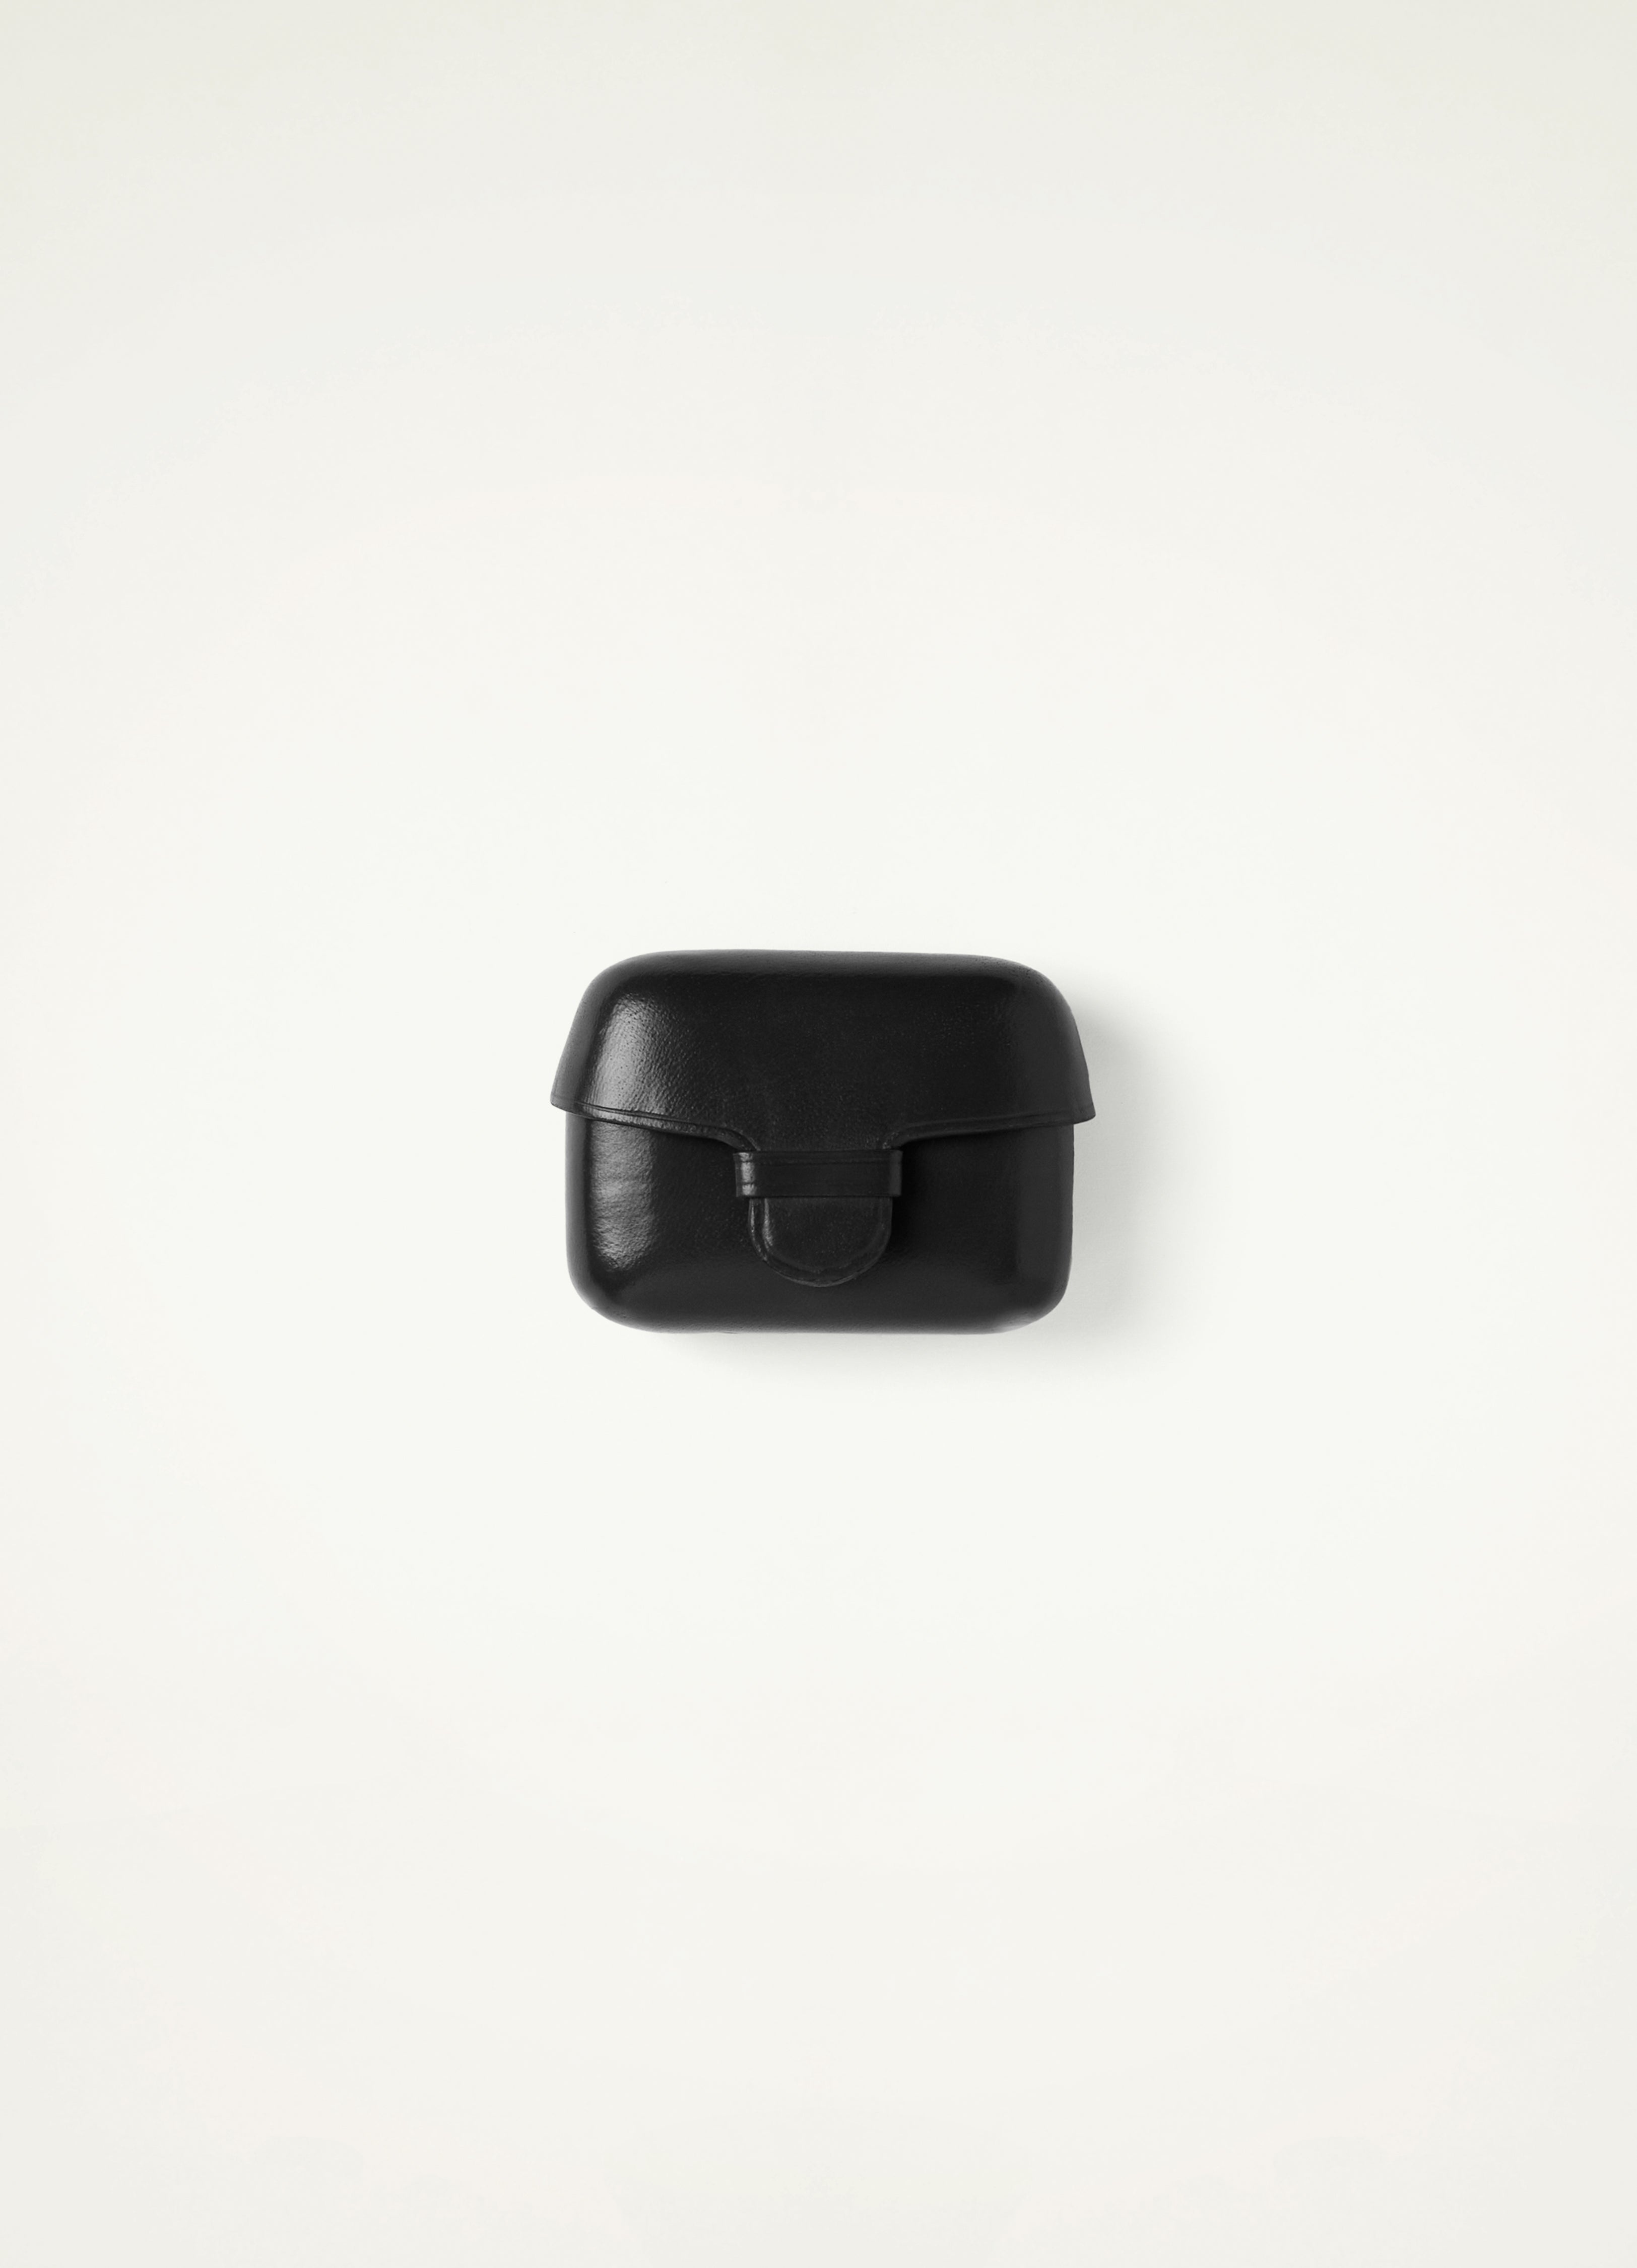 IL BUSSETTO FOR LEMAIRE AIRPODS PRO 2 CASE HOLDER - 1